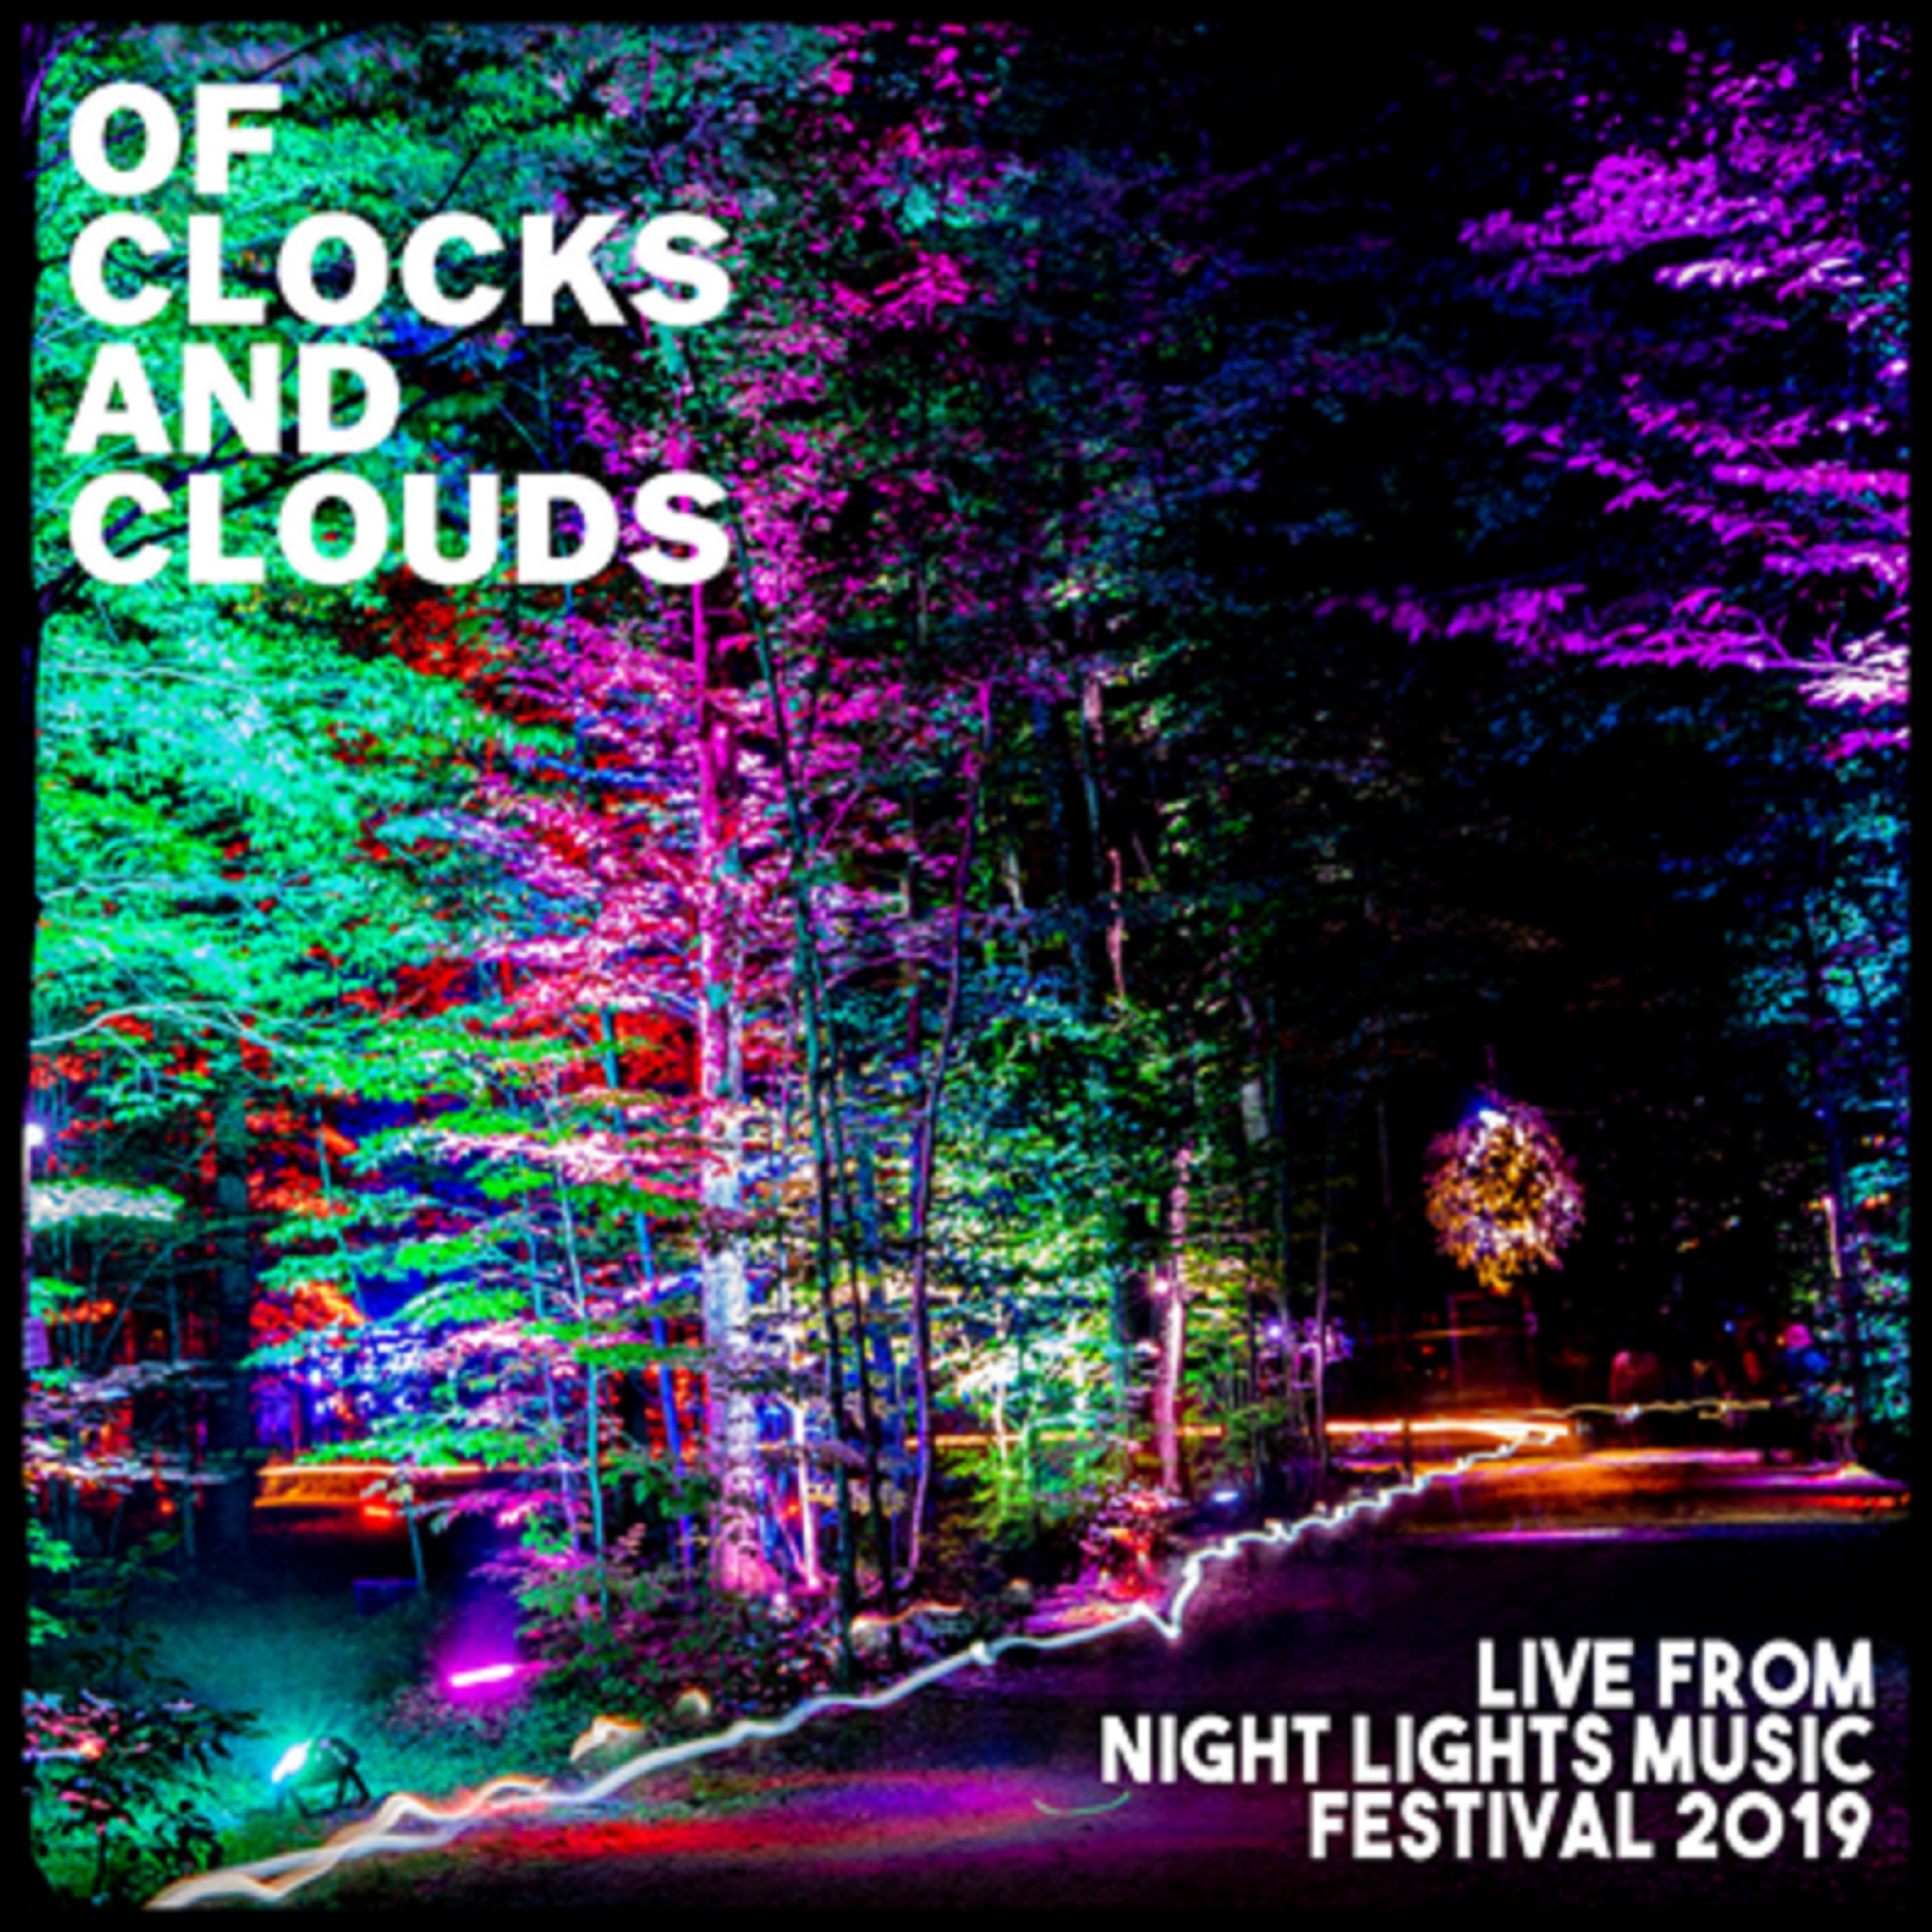 Of Clocks And Clouds to release new live album Live From Night Lights Music Festival 2019